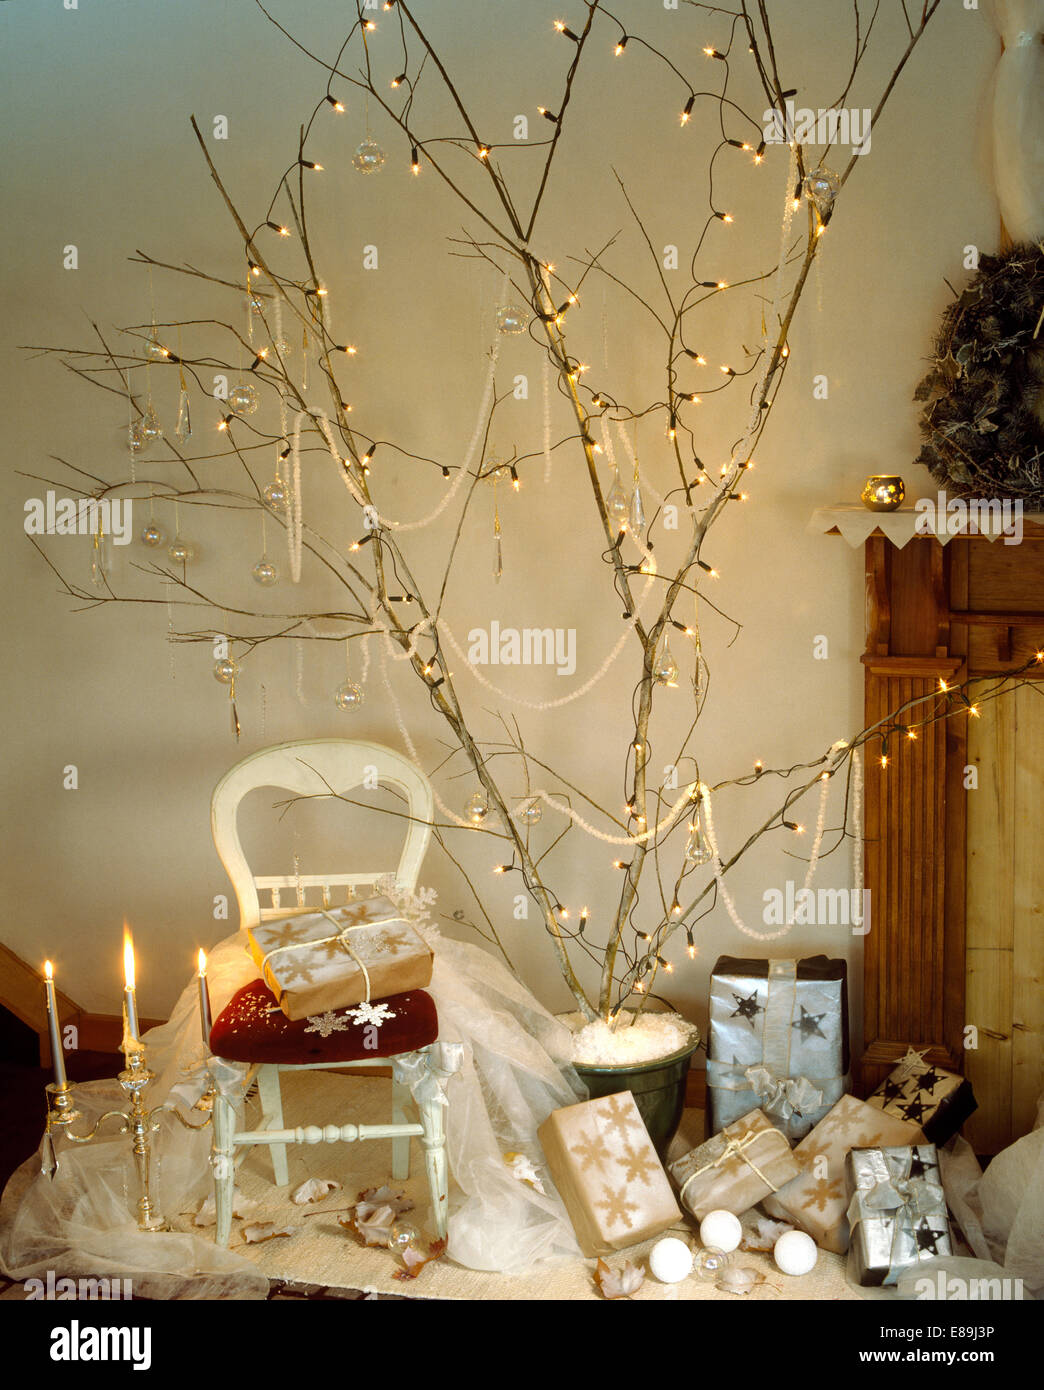 Home-made Christmas tree of fairy lights on tall branches above Christmas  presents Stock Photo - Alamy